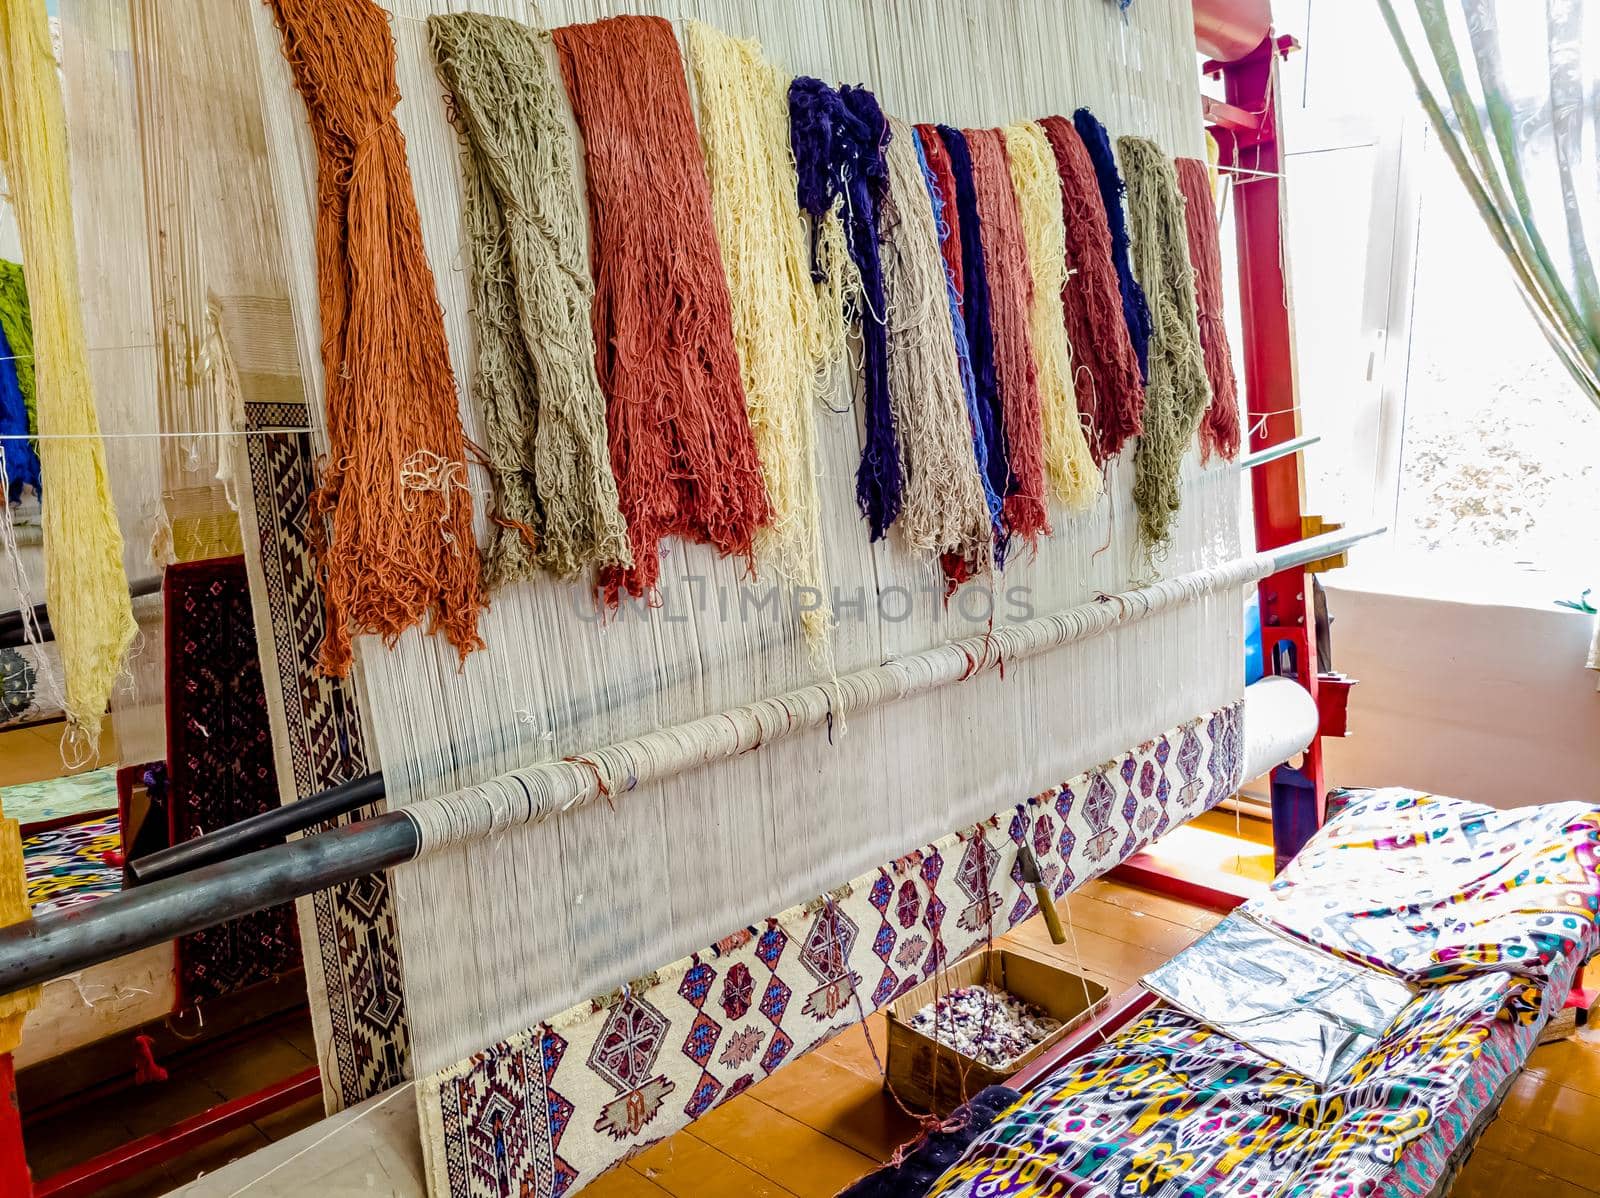 Workshop for the manual production of silk carpets in Central Asia. Uzbekistan by Milanchikov